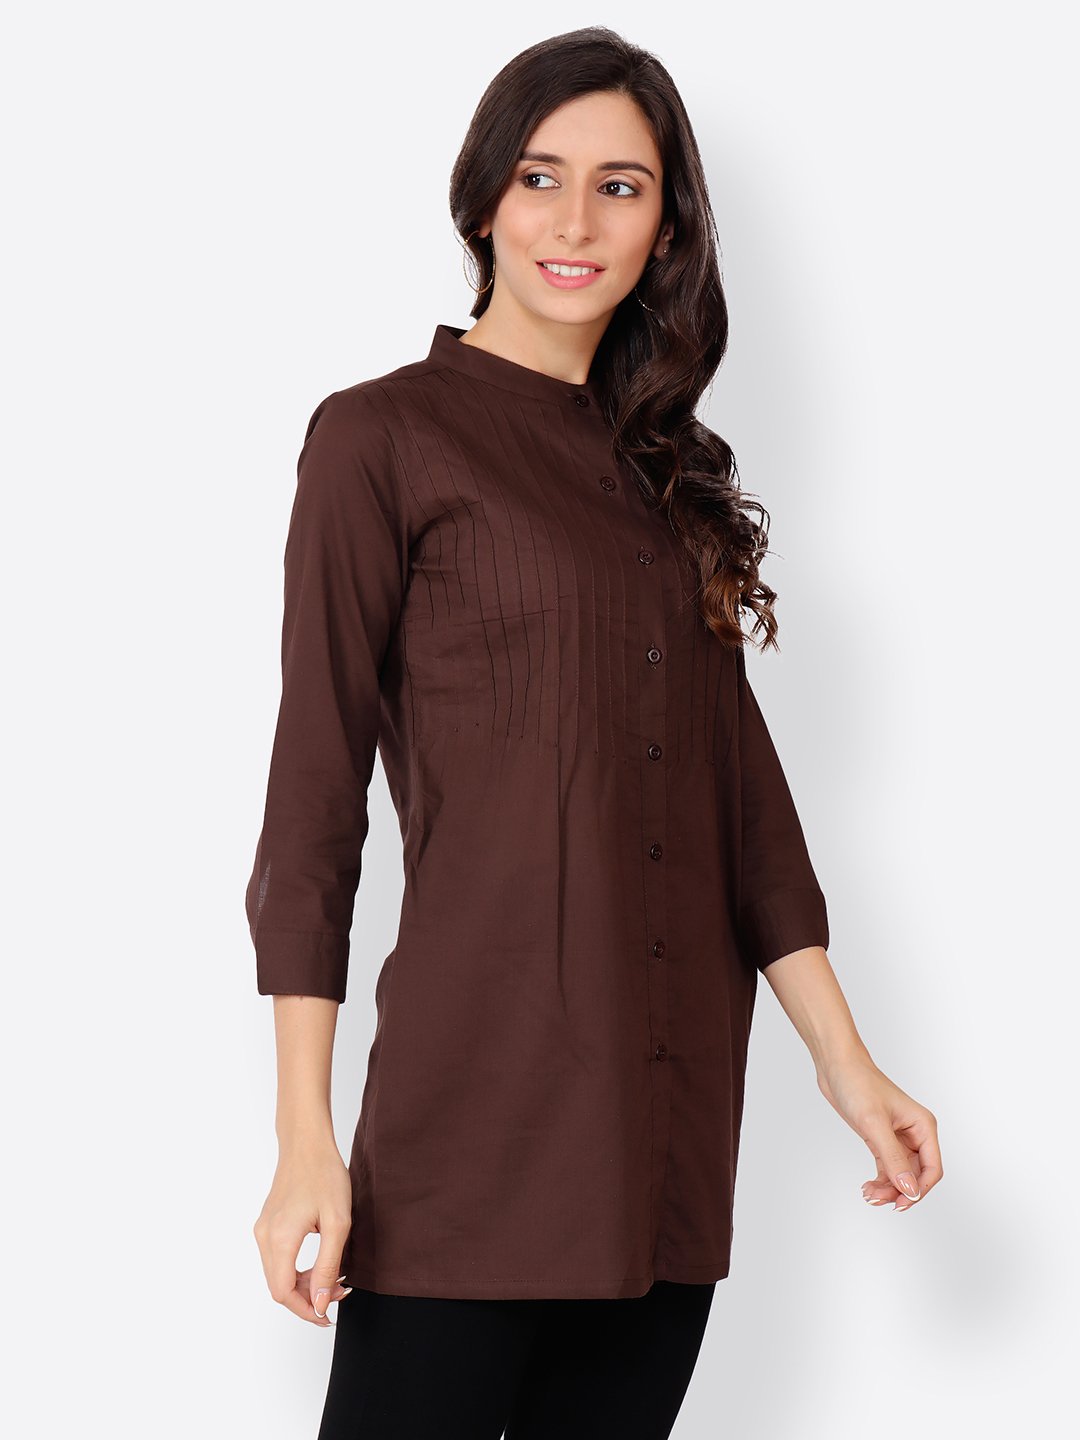 Cation Brown Tunic